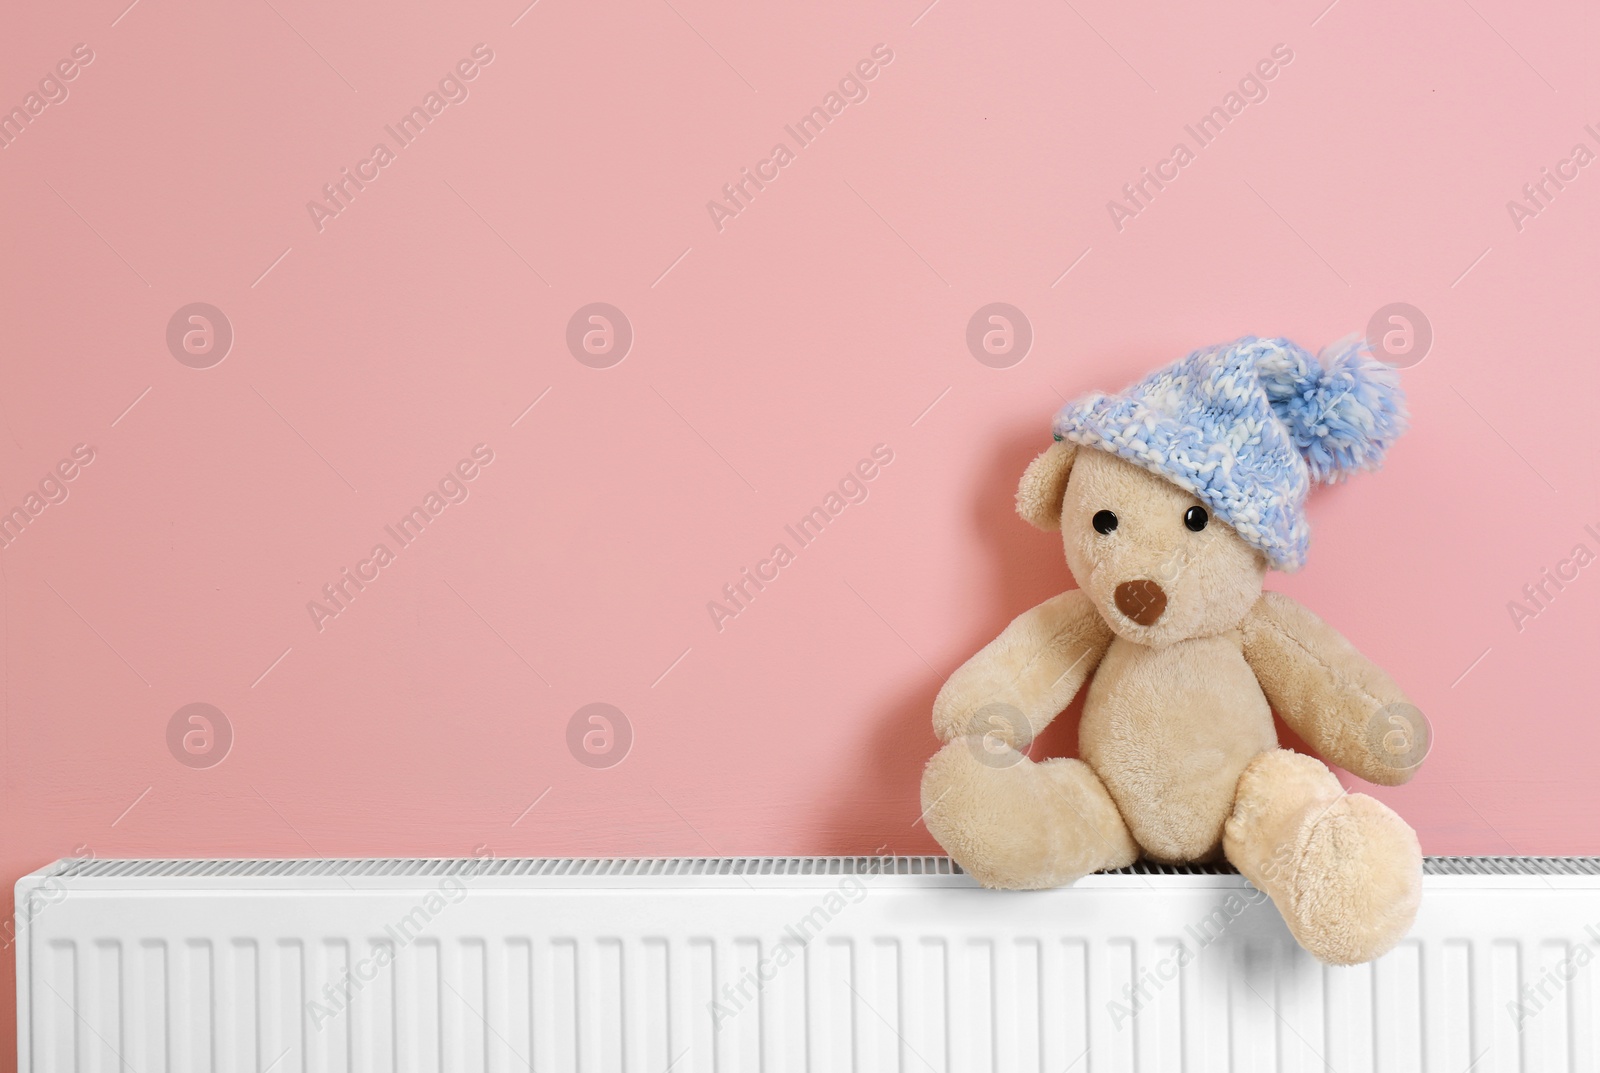 Photo of Teddy bear with knitted hat on heating radiator near color wall. Space for text